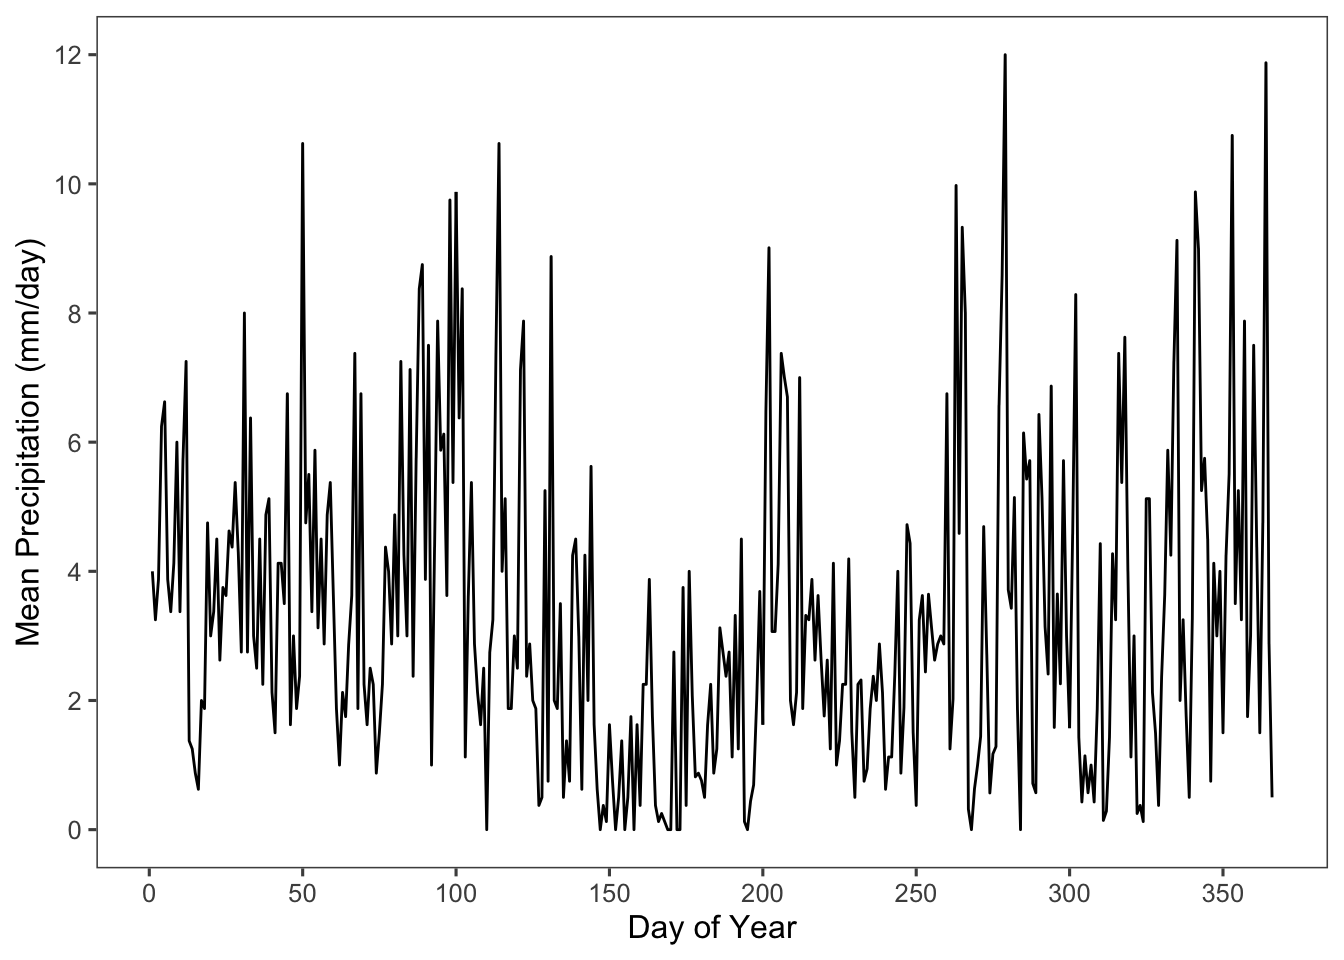 Mean daily precipitation by day of year, averaged from 2003 to 2012.